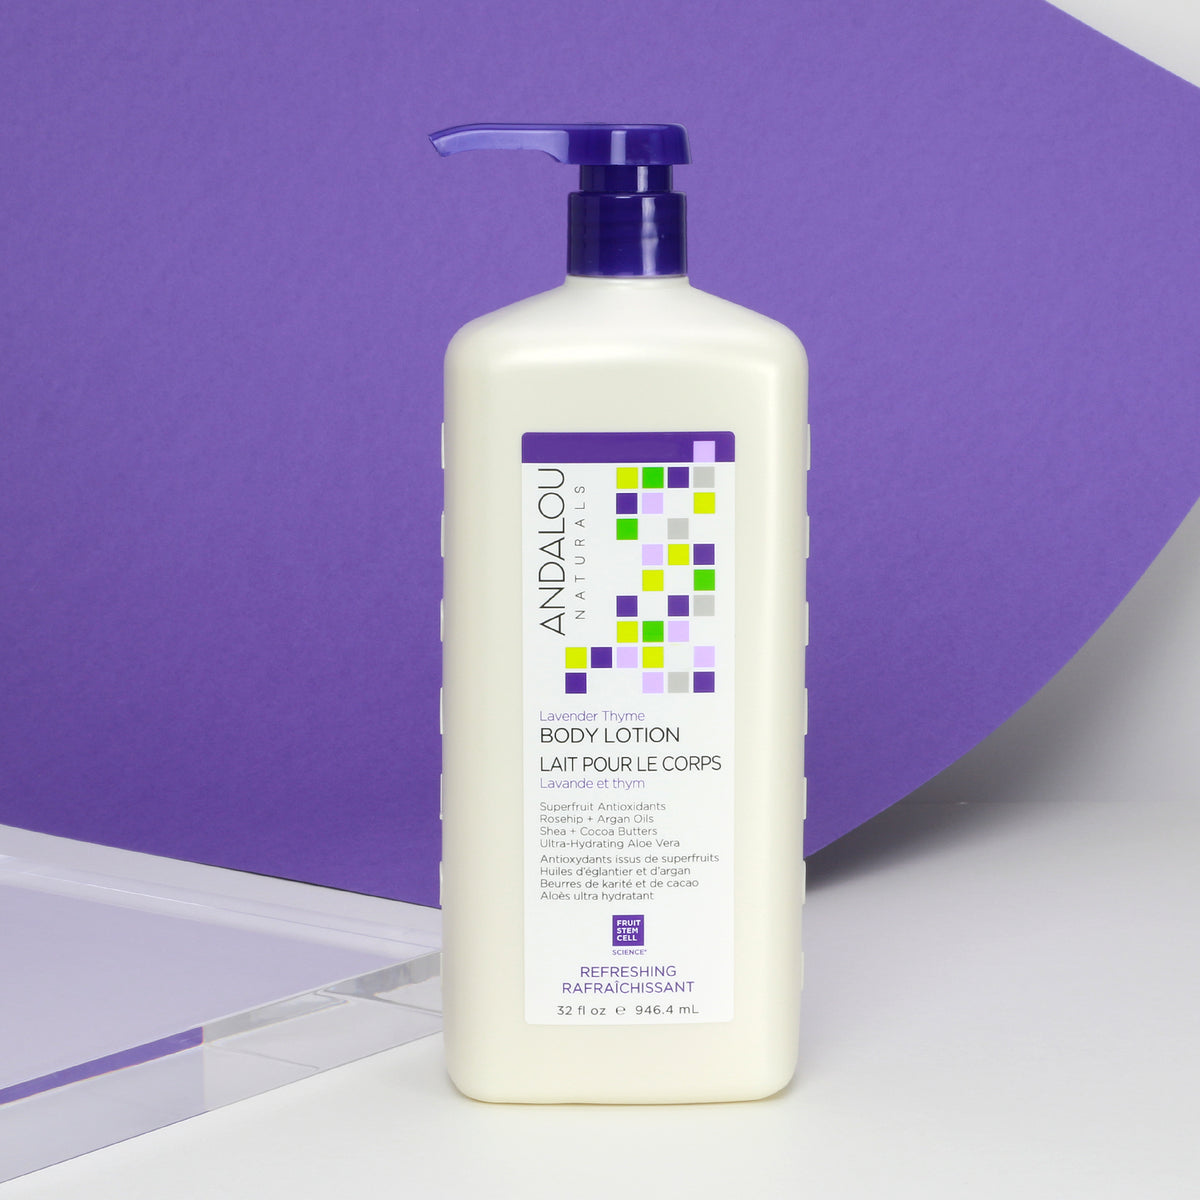 Lavender Thyme Refreshing Body Lotion - Value Size - Andalou Naturals US